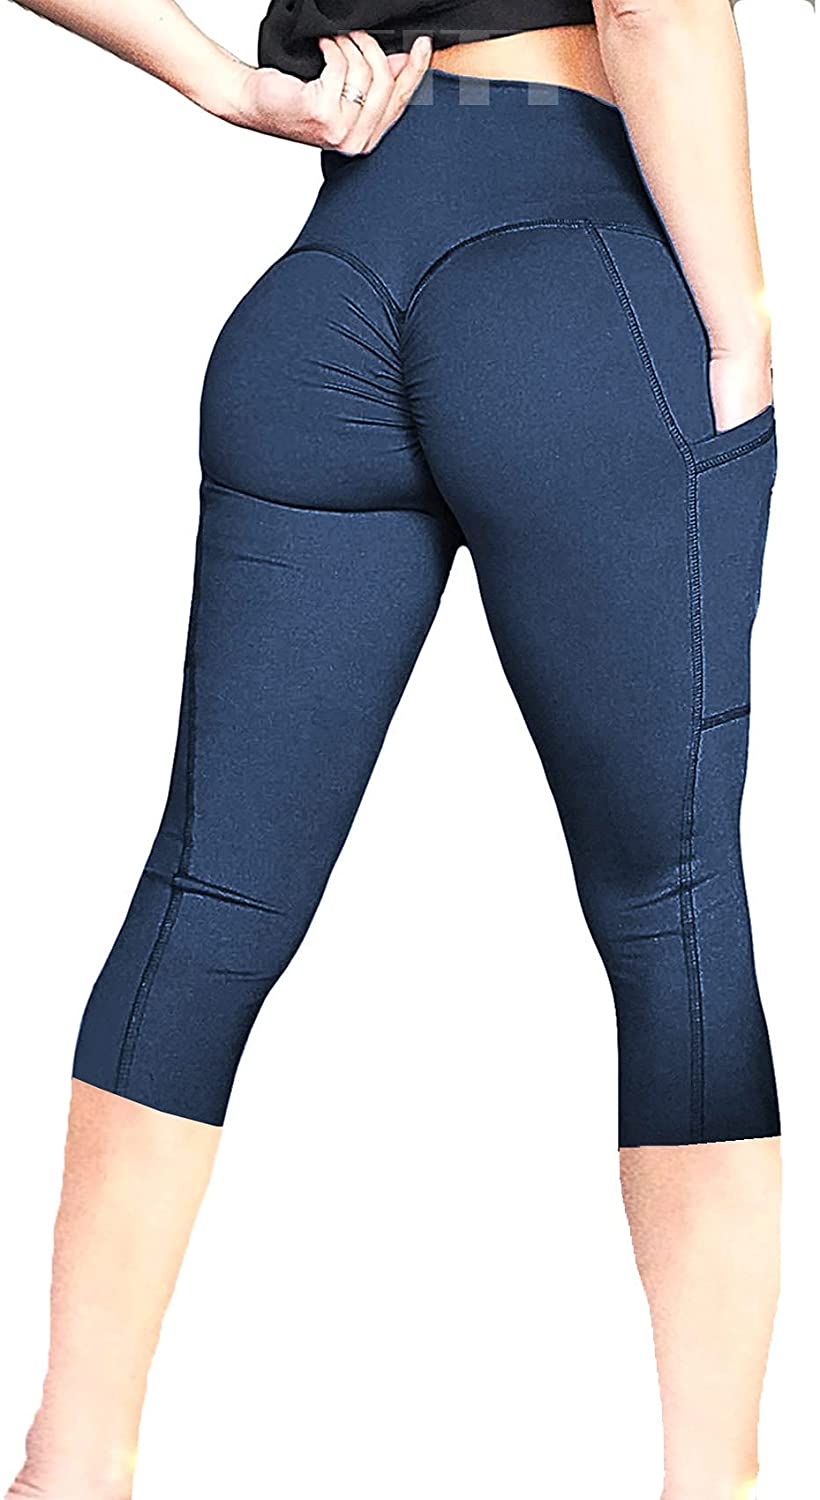 Women Sexy Yoga Pants Sport Leggings Gym Tight Trouser Elastic Fitness  Workout Running Pant Fitness Shape From Uinfashion, $8.71